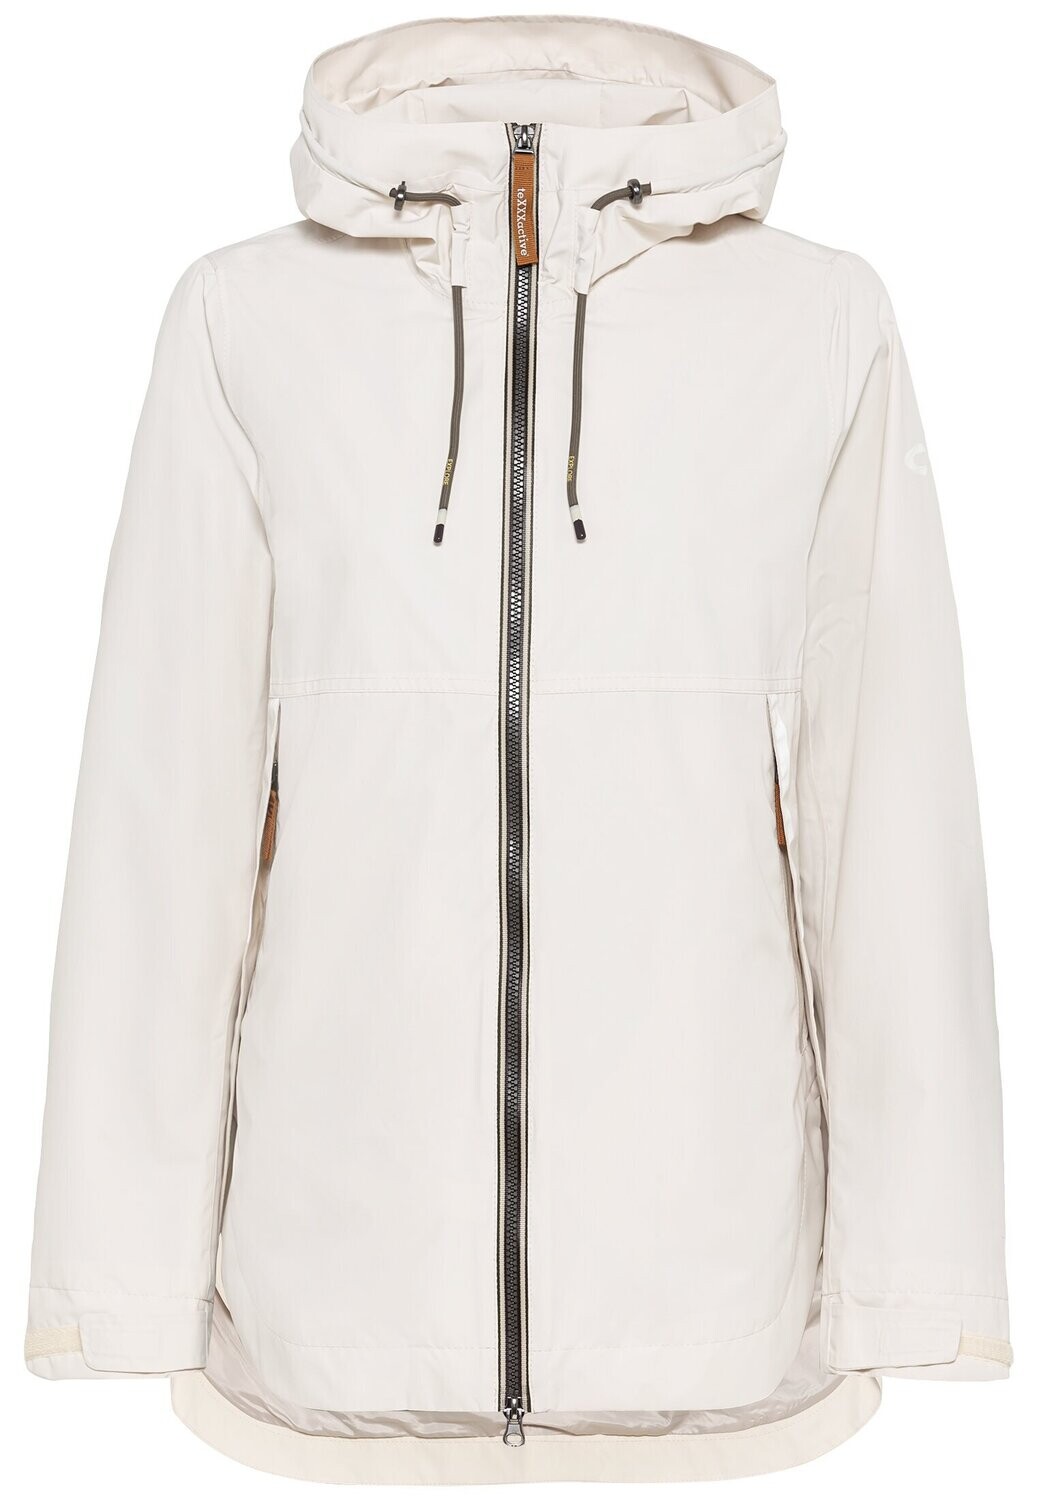 Camel Active outdoor jacket off white